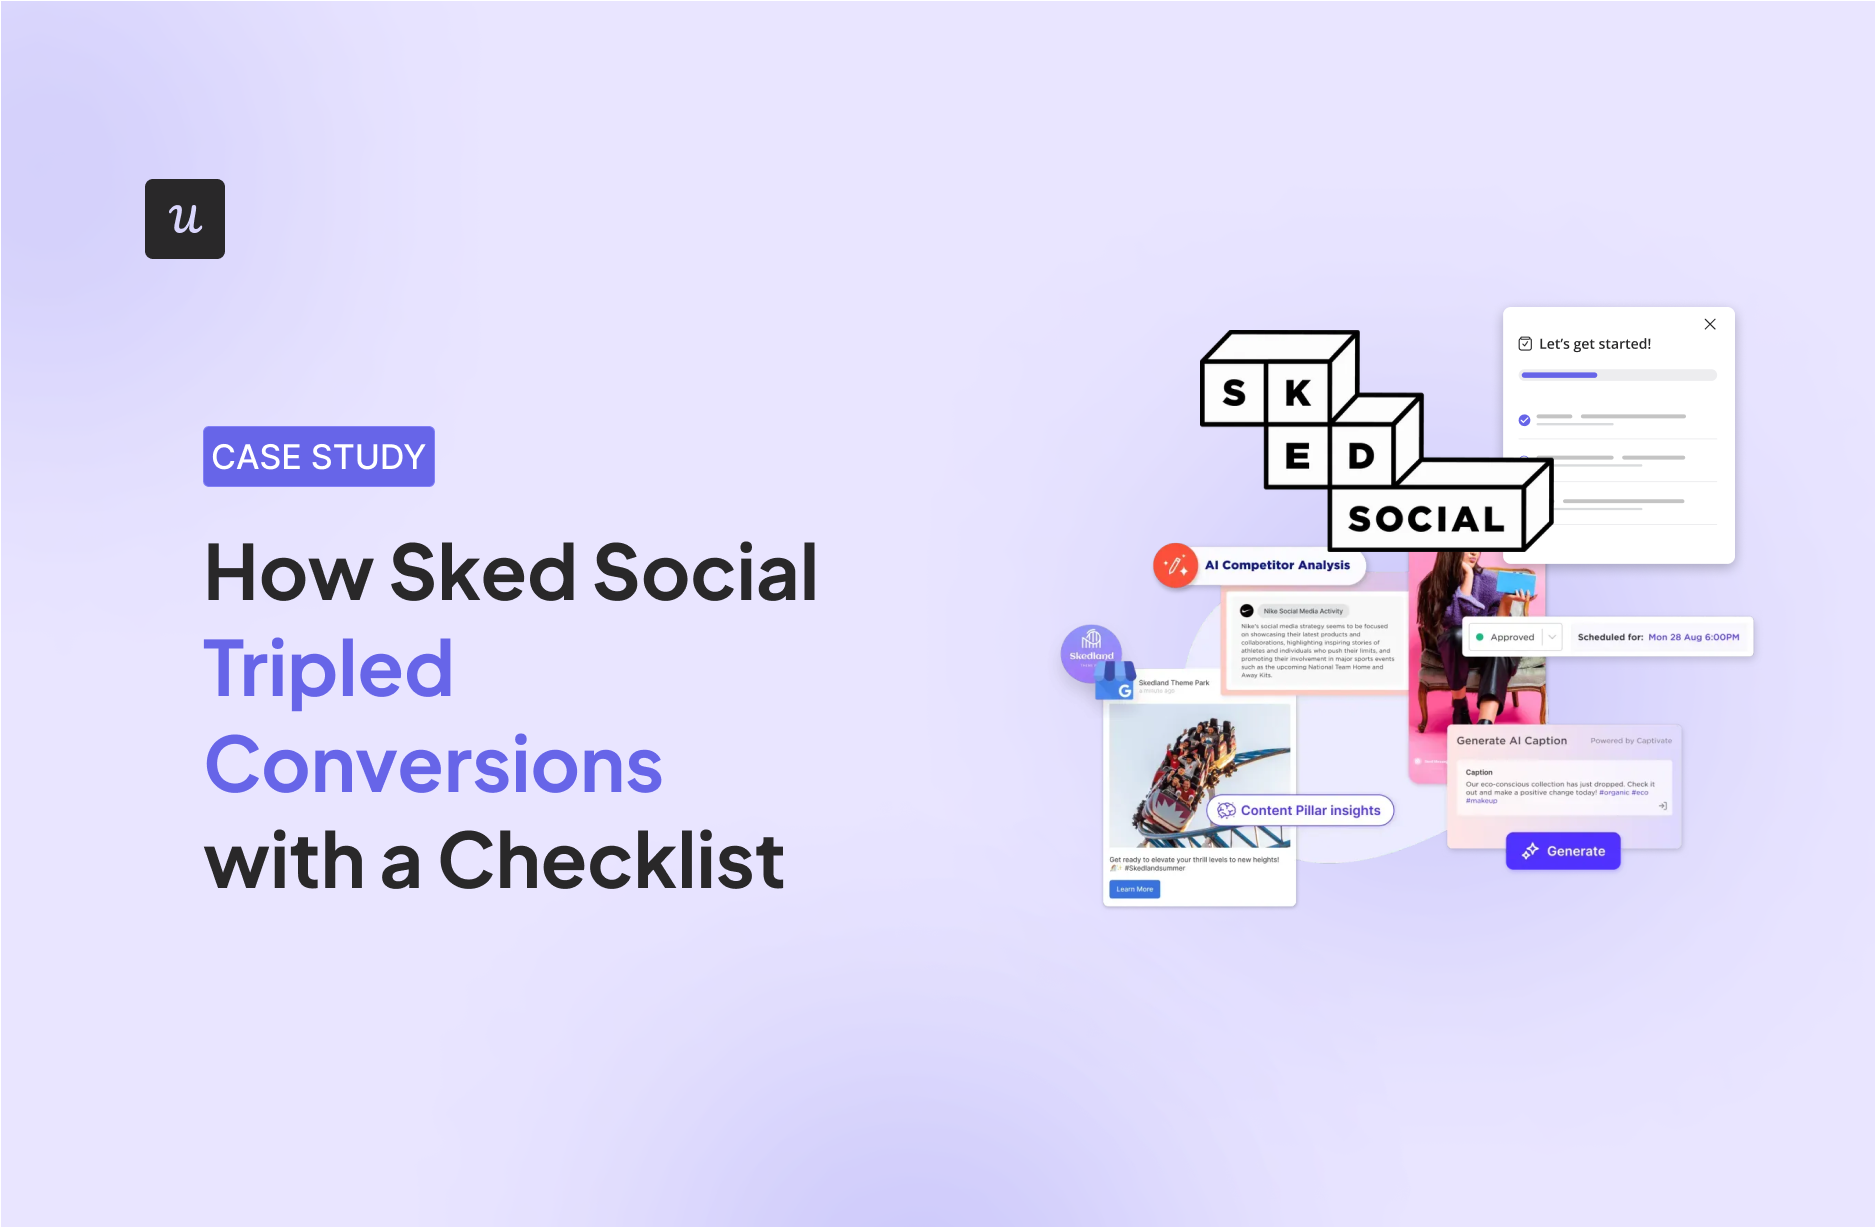 [CASE STUDY] How Sked Social Tripled Conversions with a Checklist